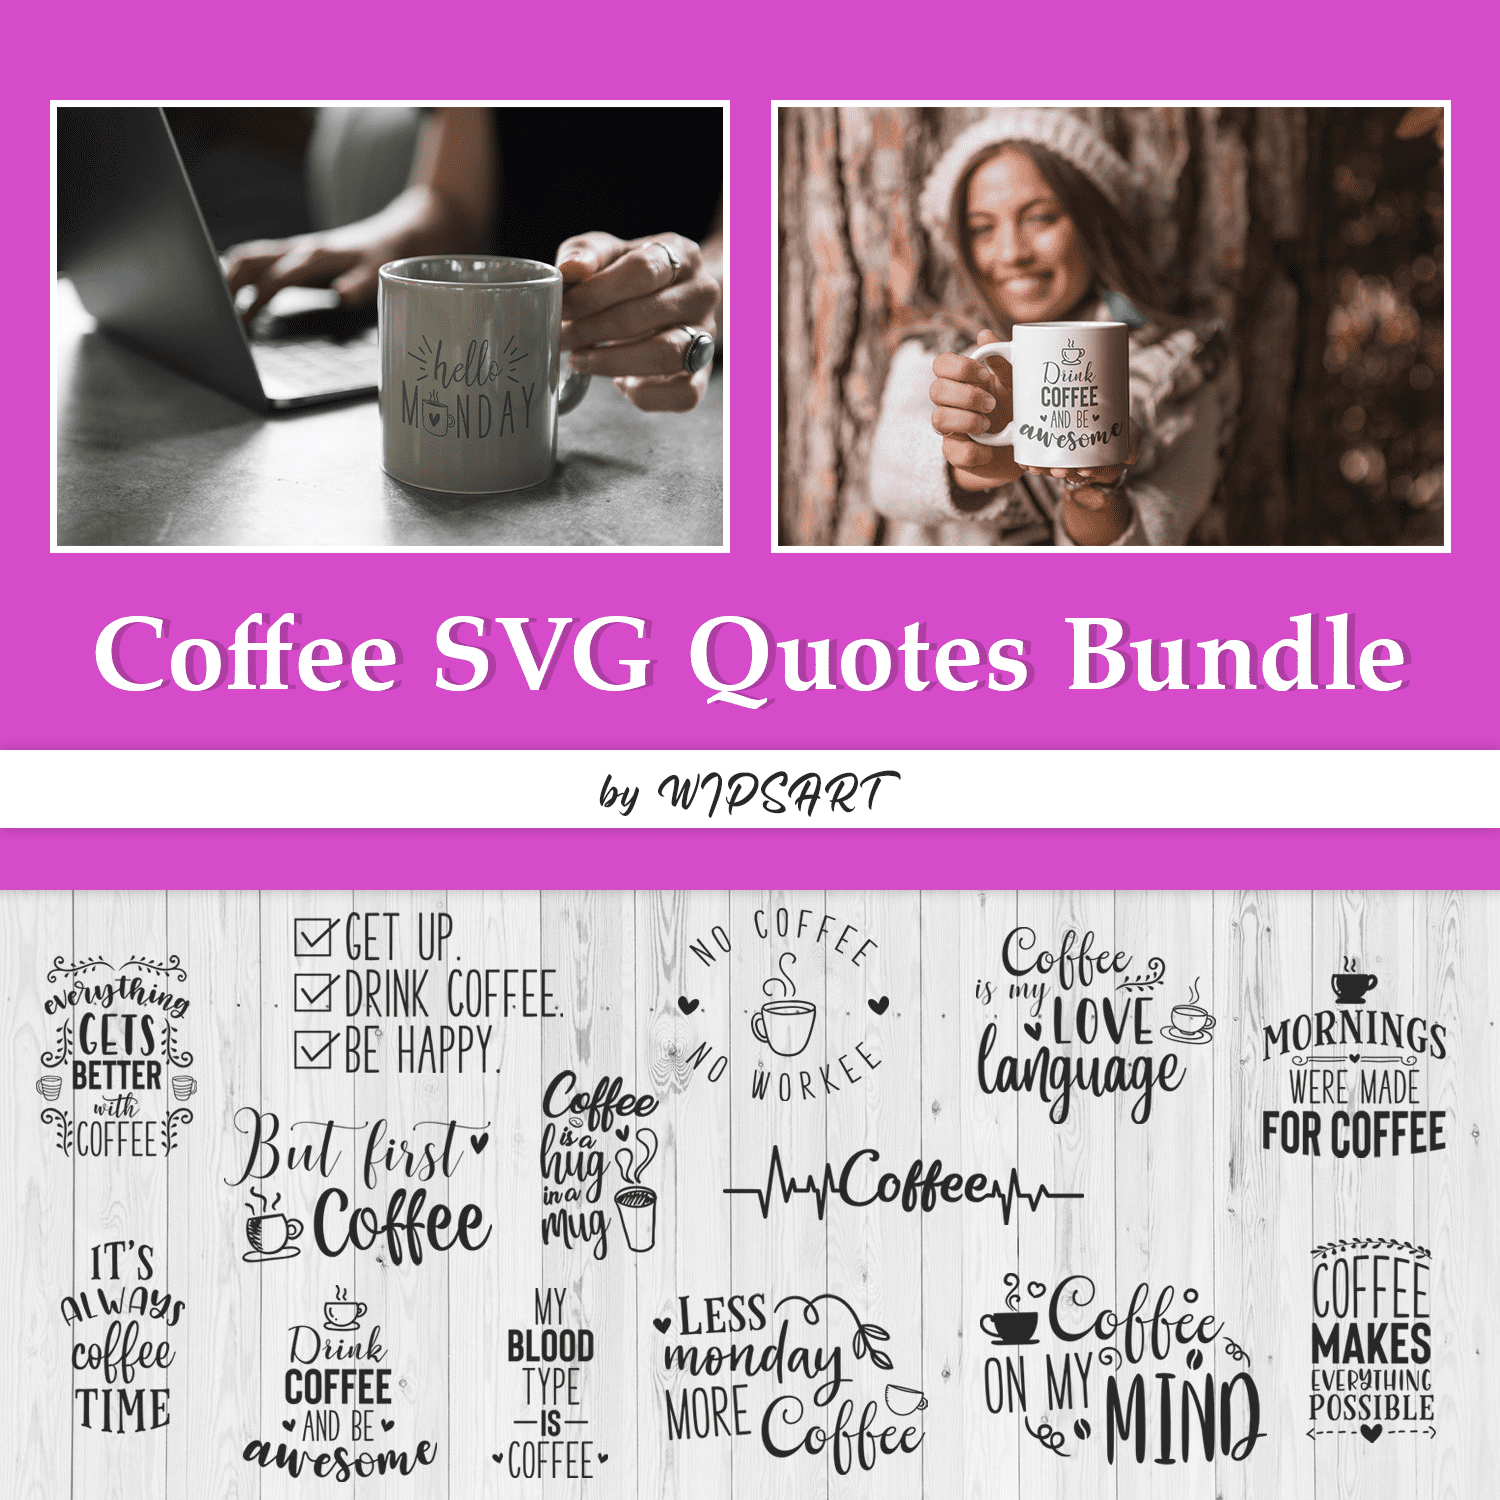 Coffee SVG Quotes Bundle cover.